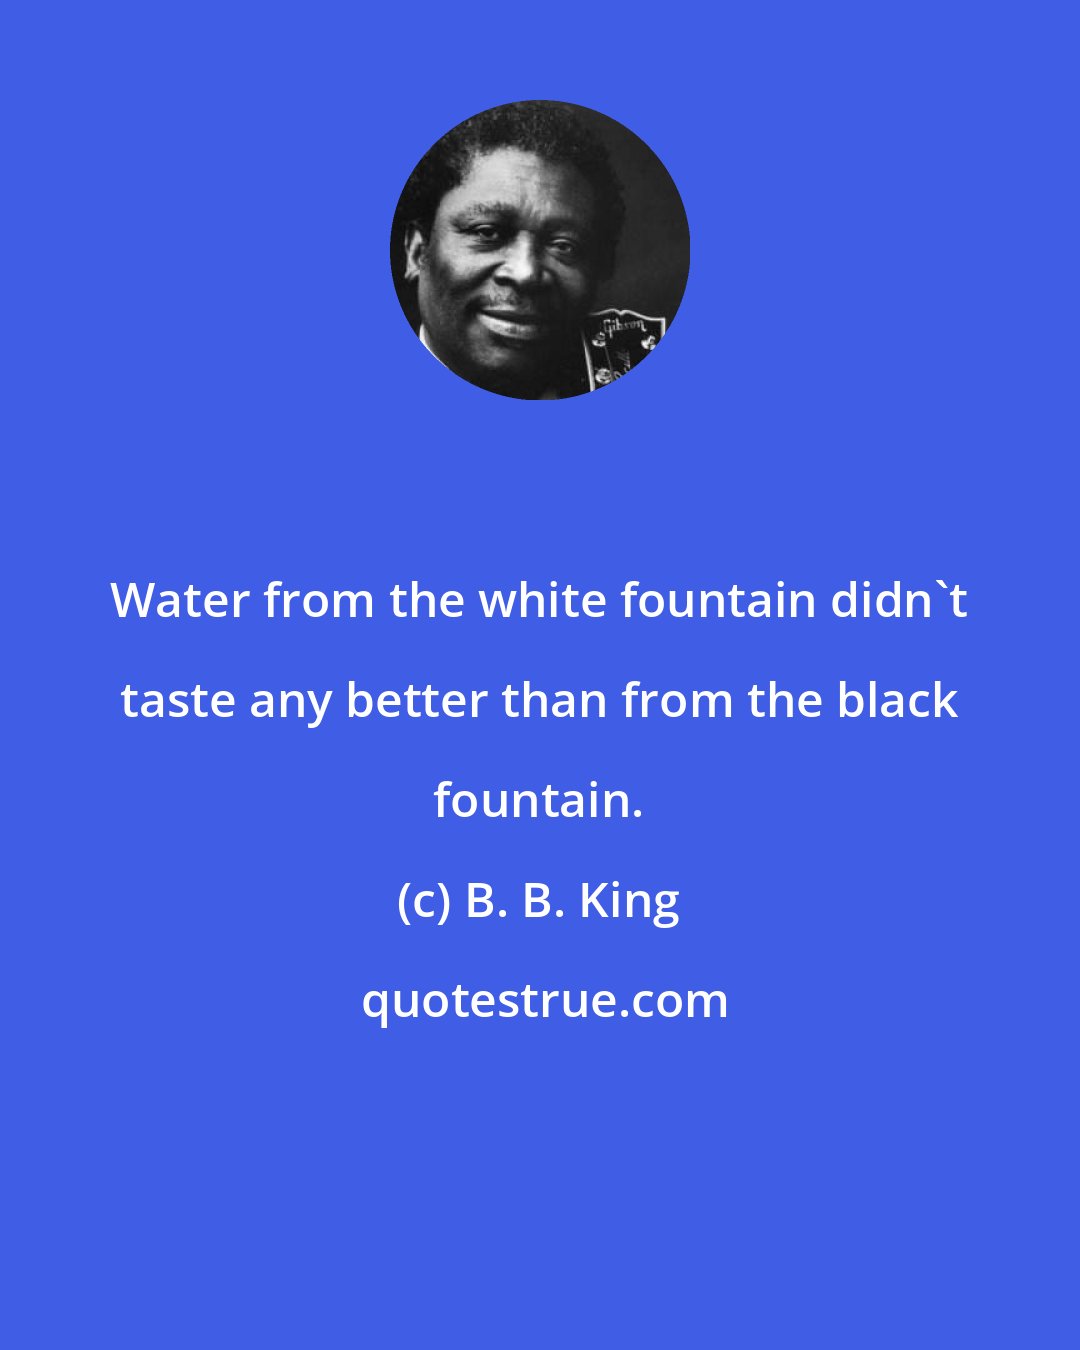 B. B. King: Water from the white fountain didn't taste any better than from the black fountain.